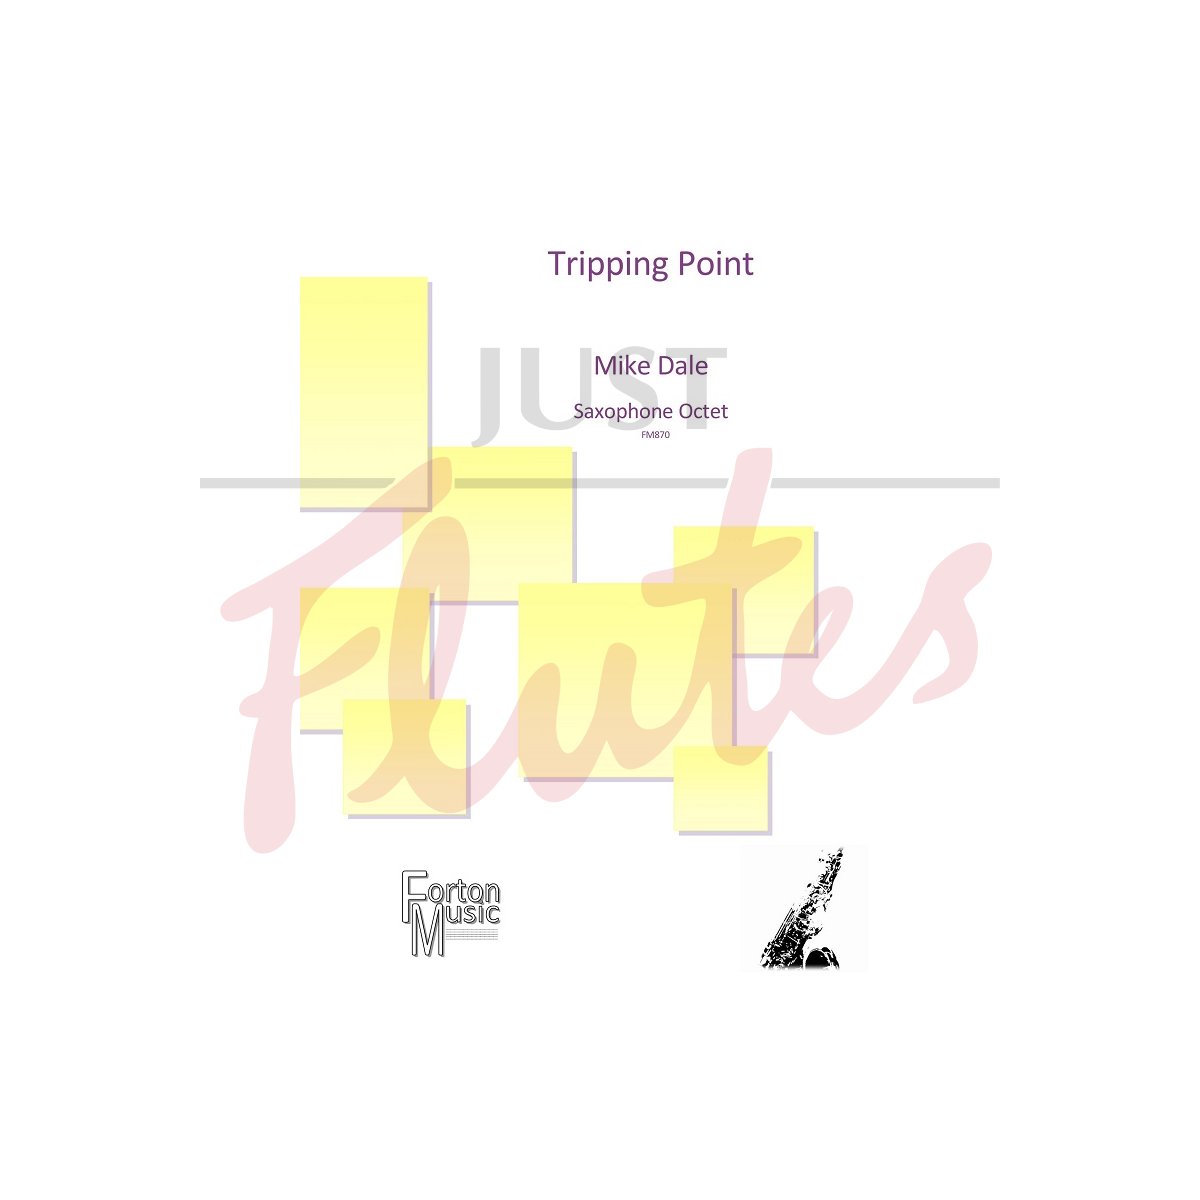 Tripping Point